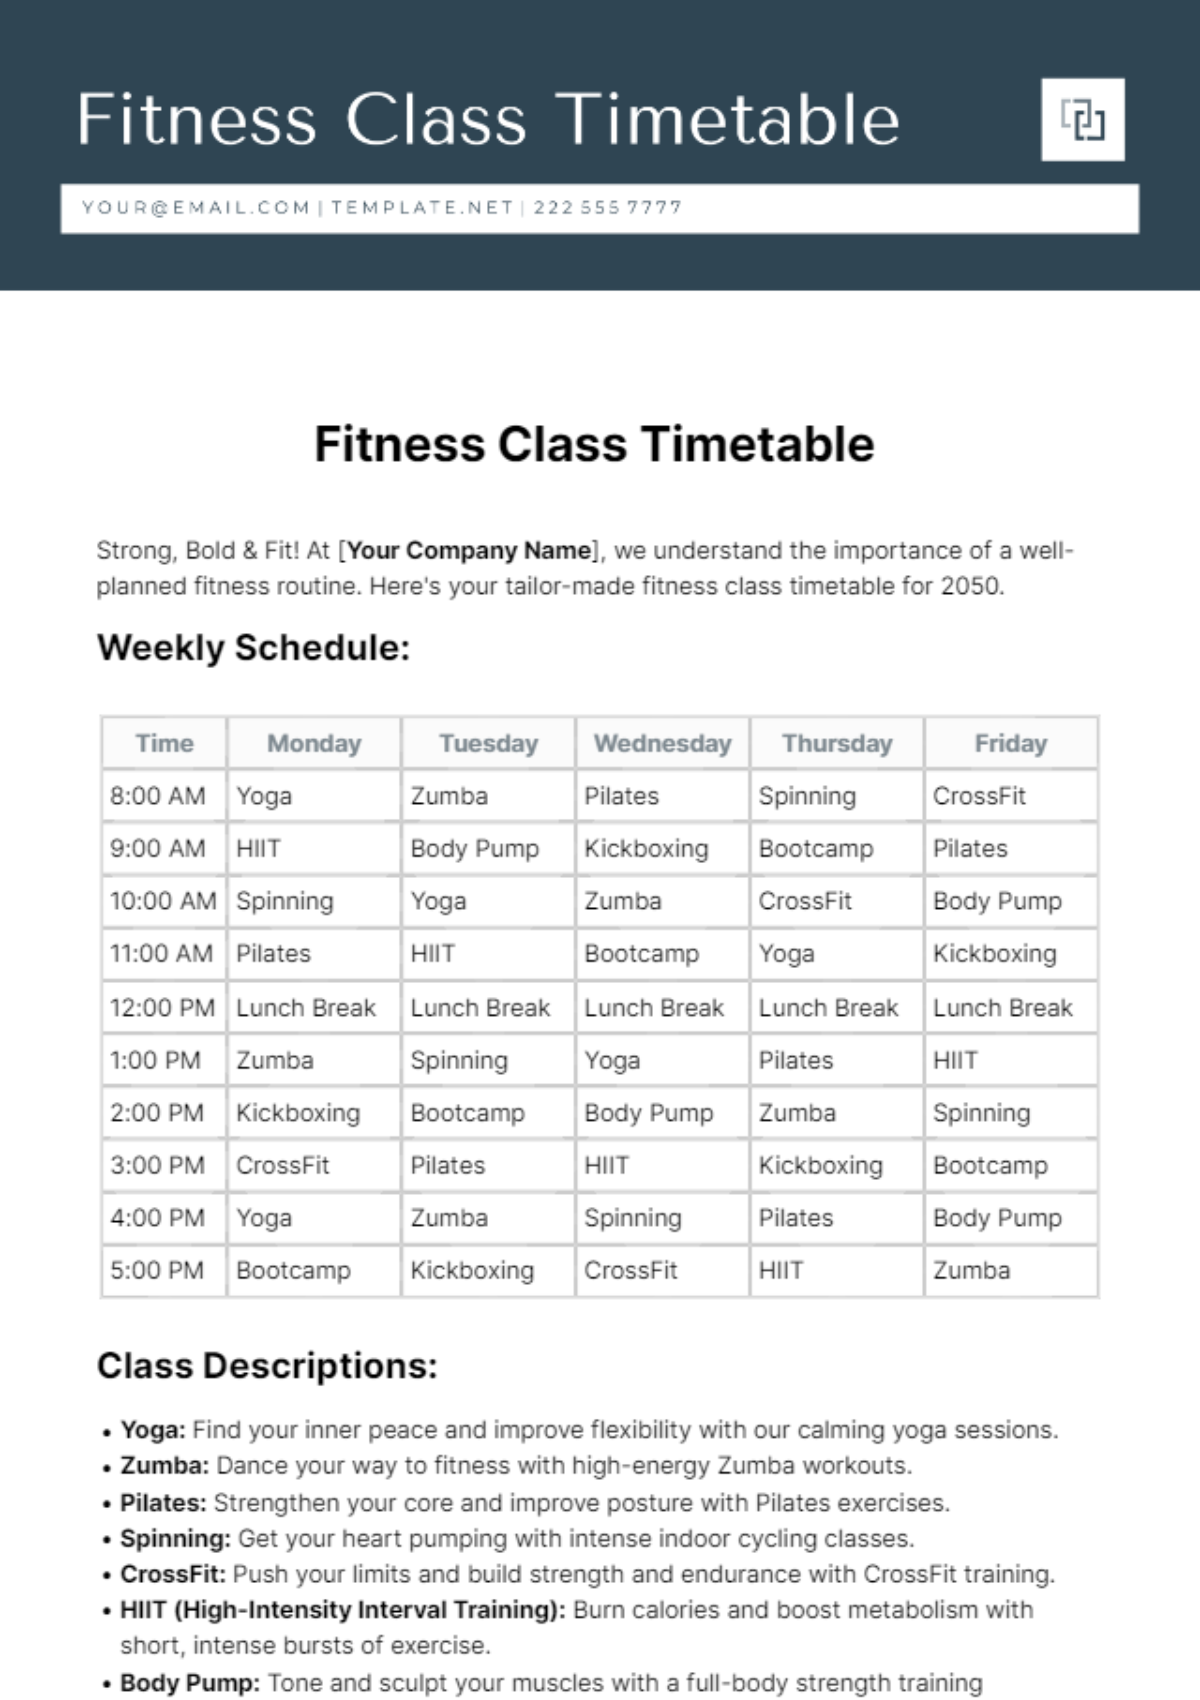 Free Fitness Class Timetable Template 